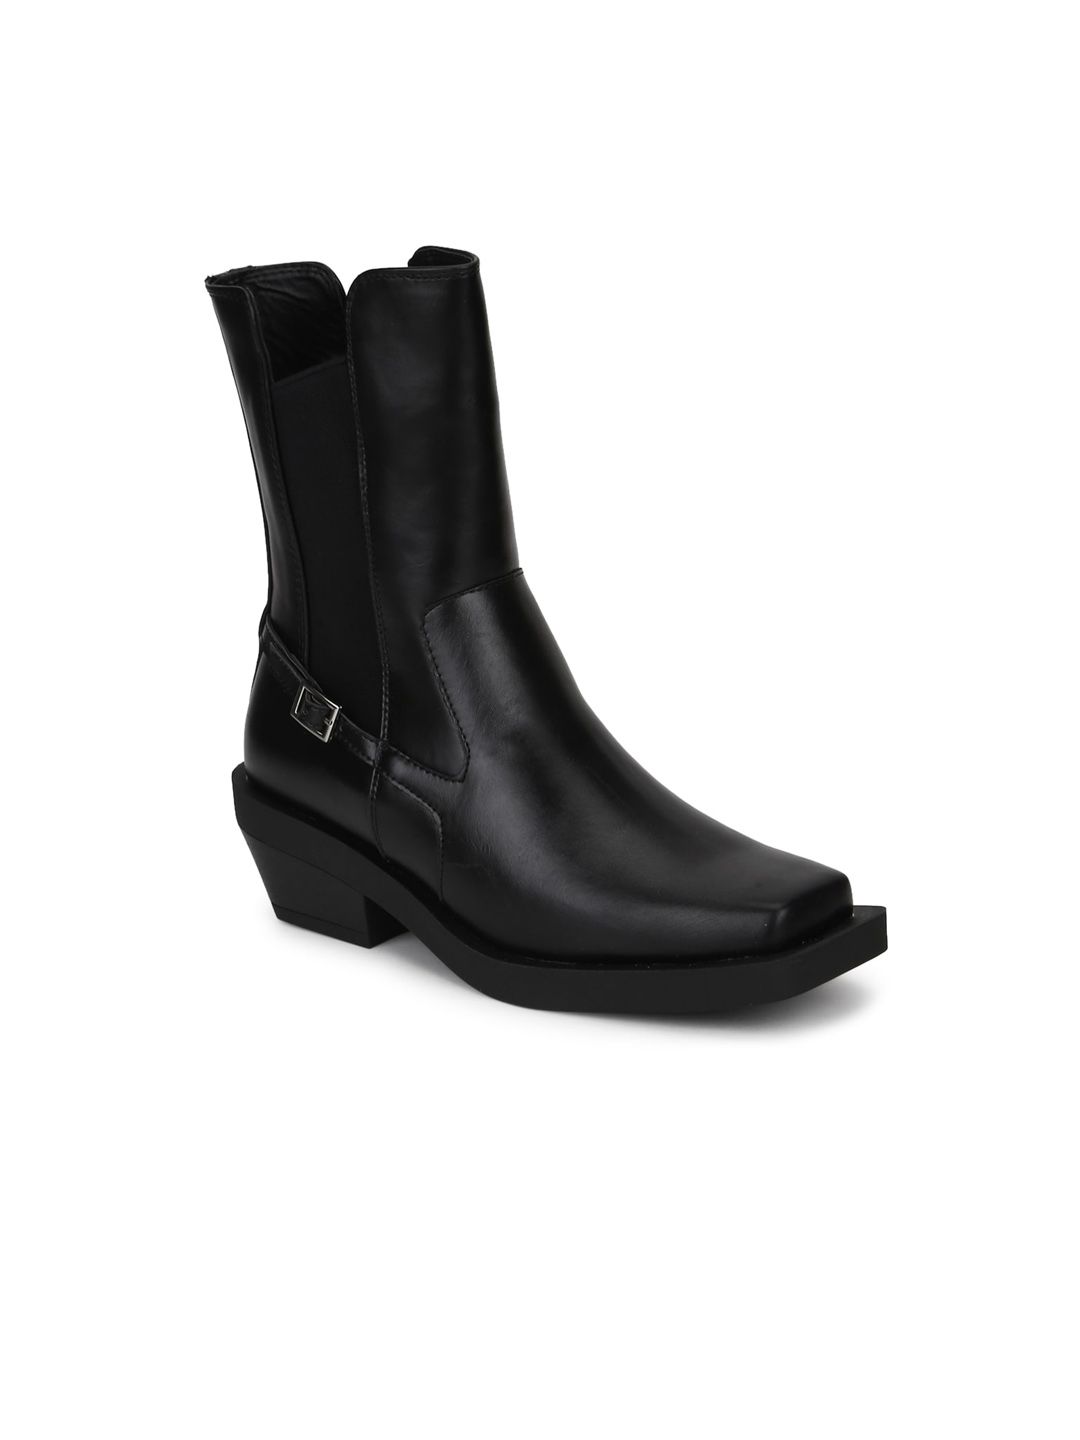 Truffle Collection Black Block Heeled Boots Price in India